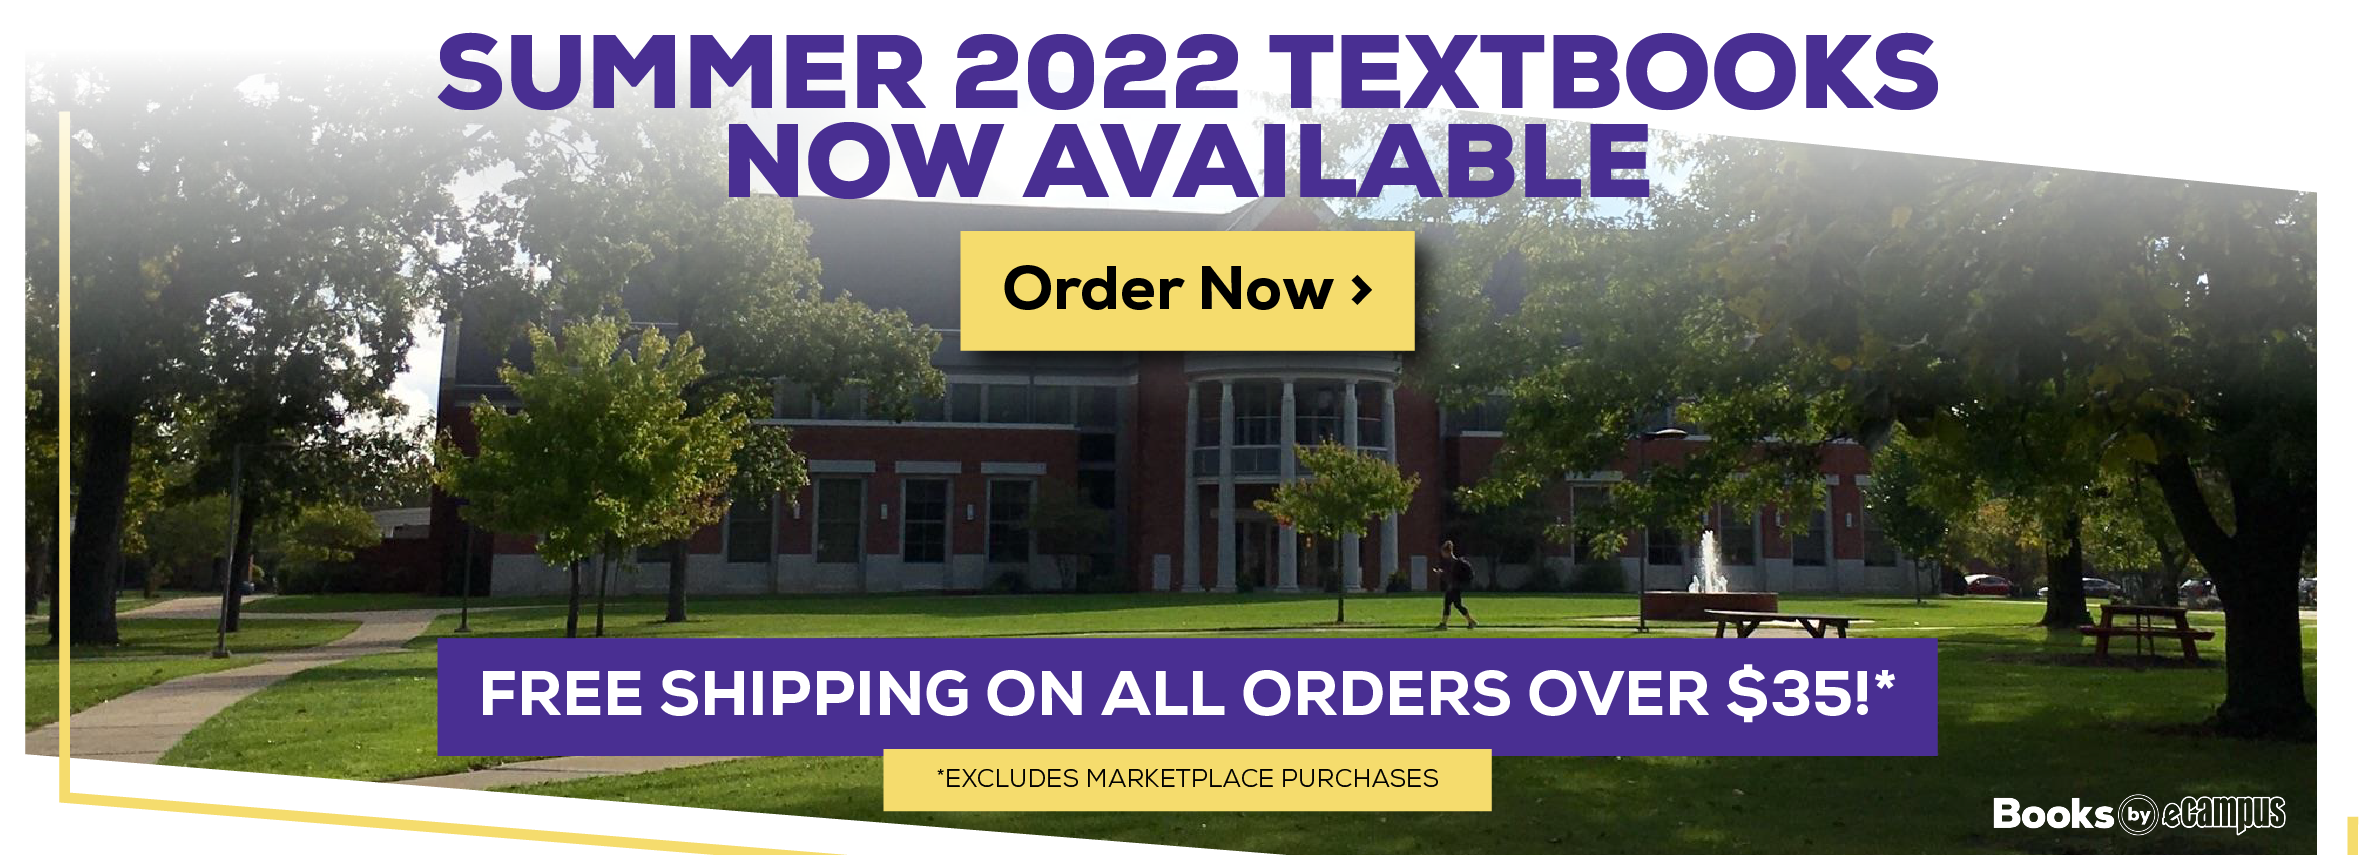 Summer 2022 Textbooks Now Available. order now. Free shipping on all orders over $35